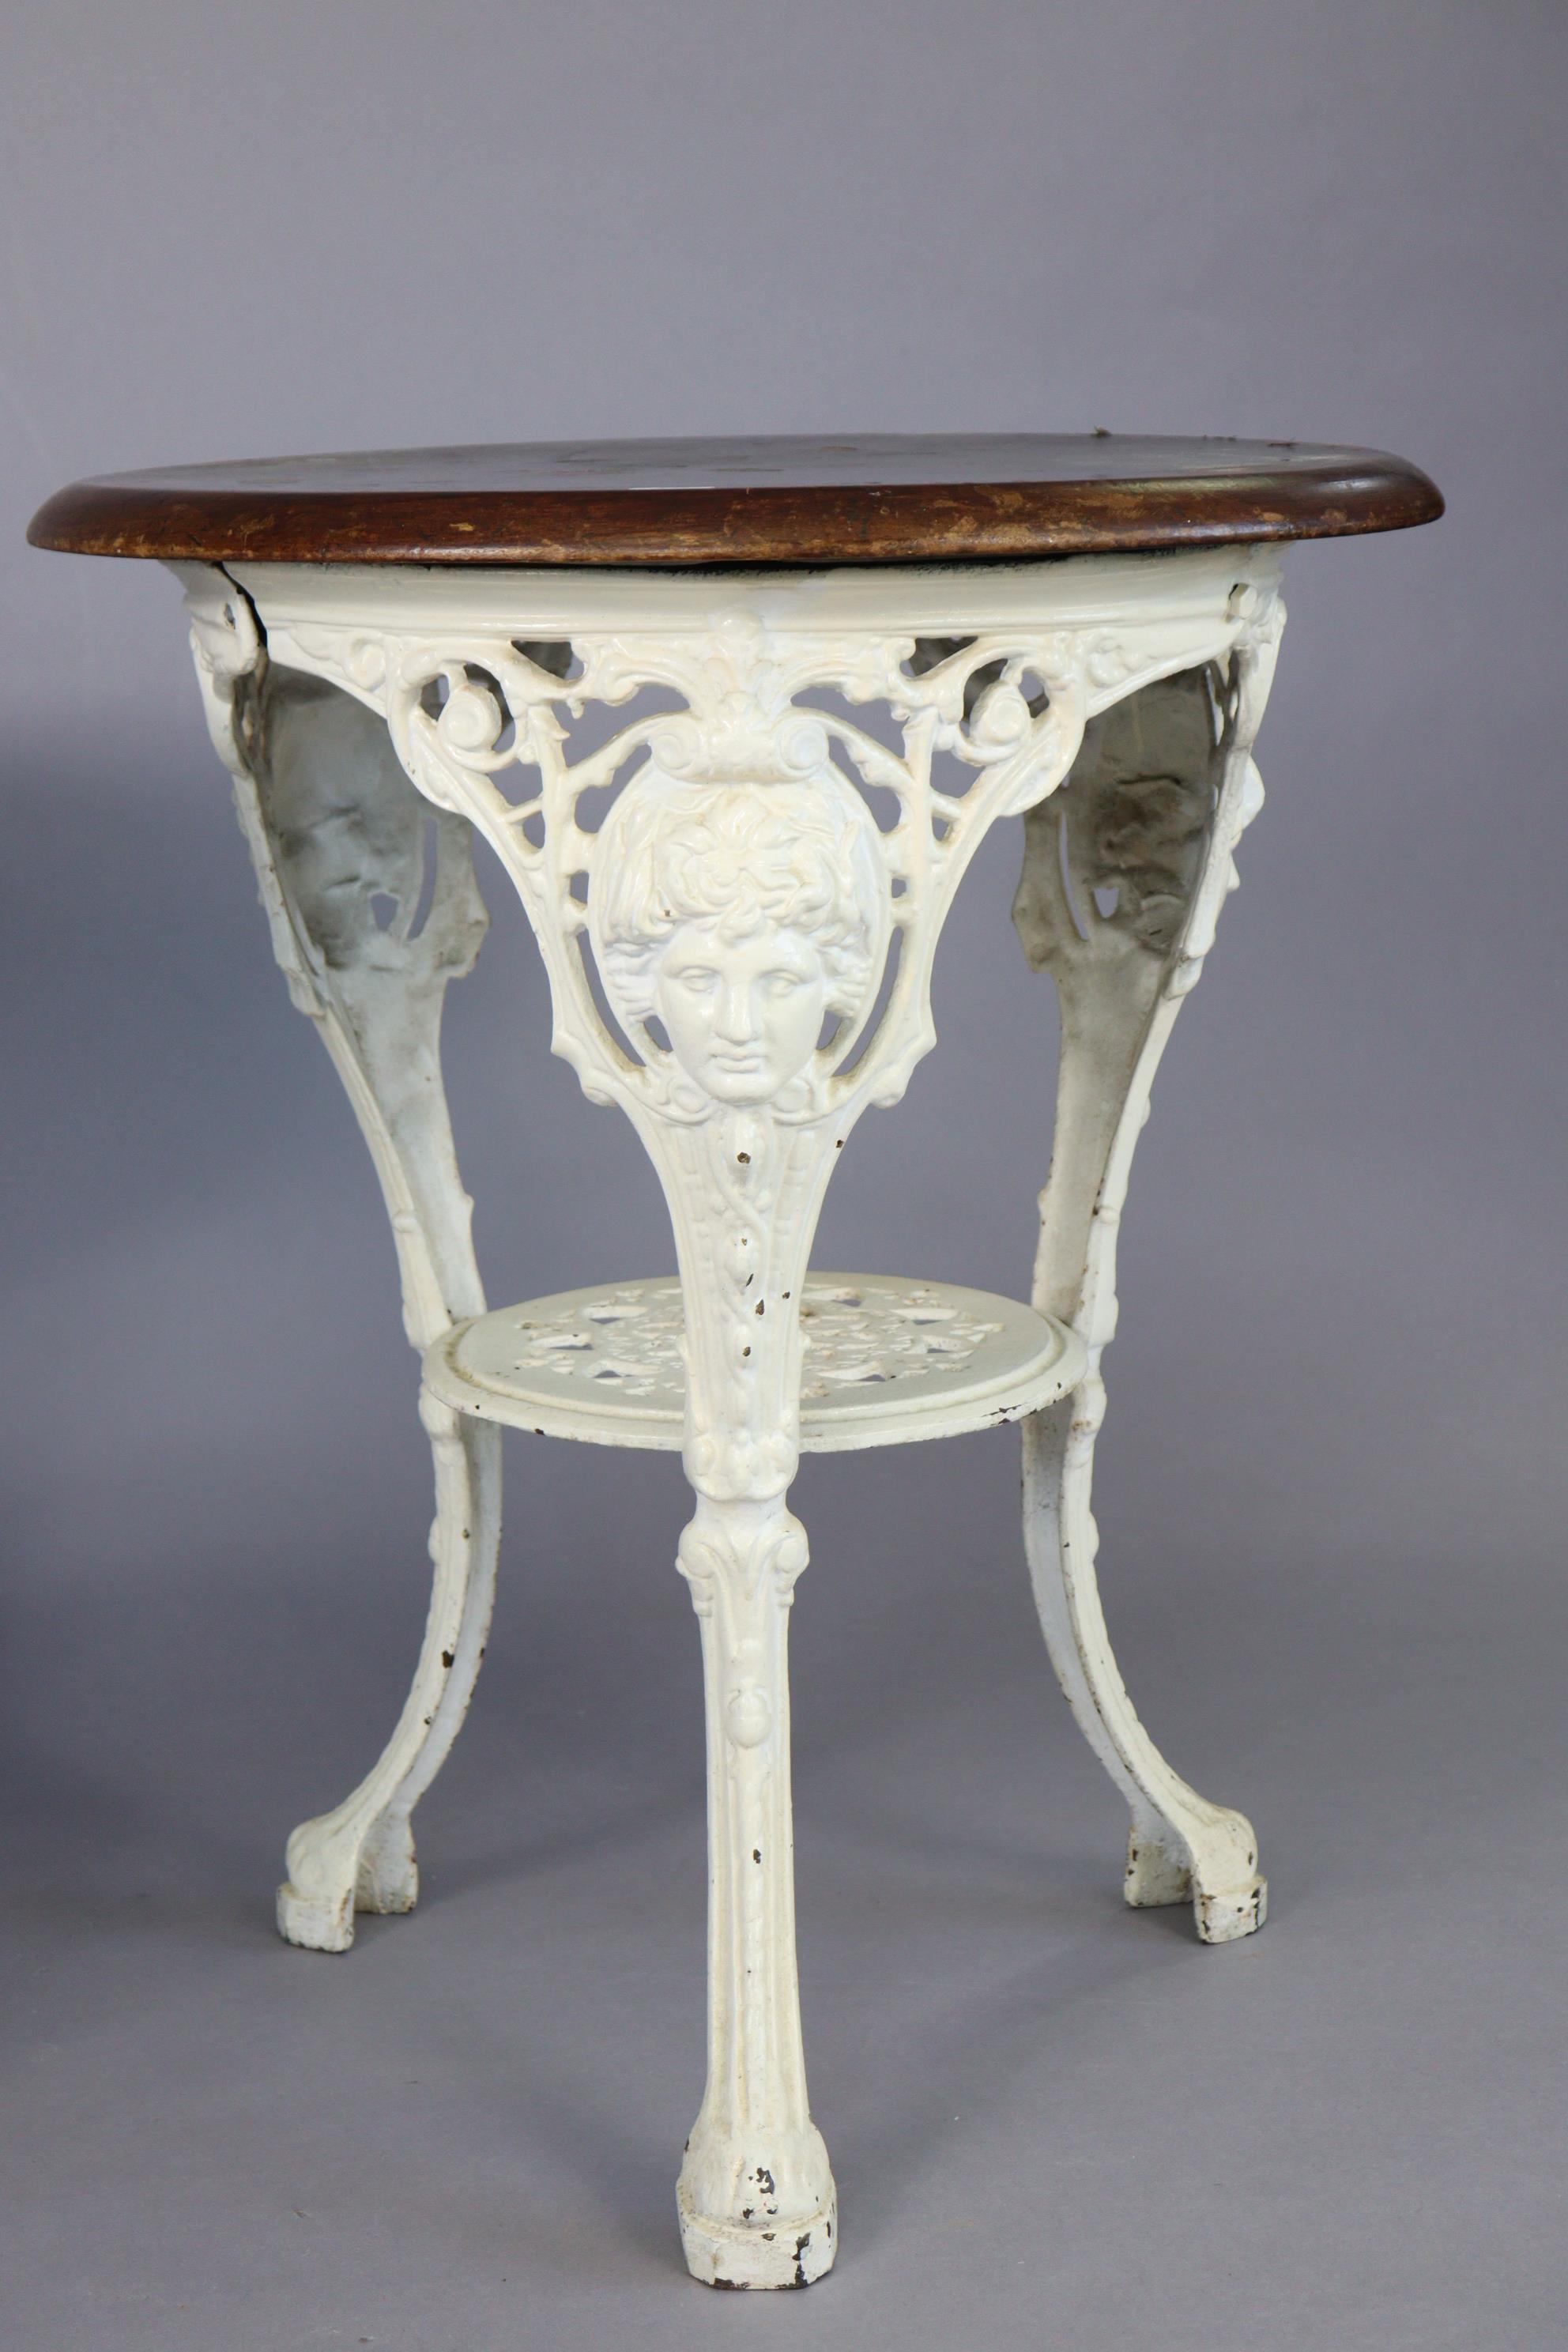 Two white painted cast-iron “Britannia” pub tables, each with a wooden top, 23½” diameter x 28” - Image 2 of 5